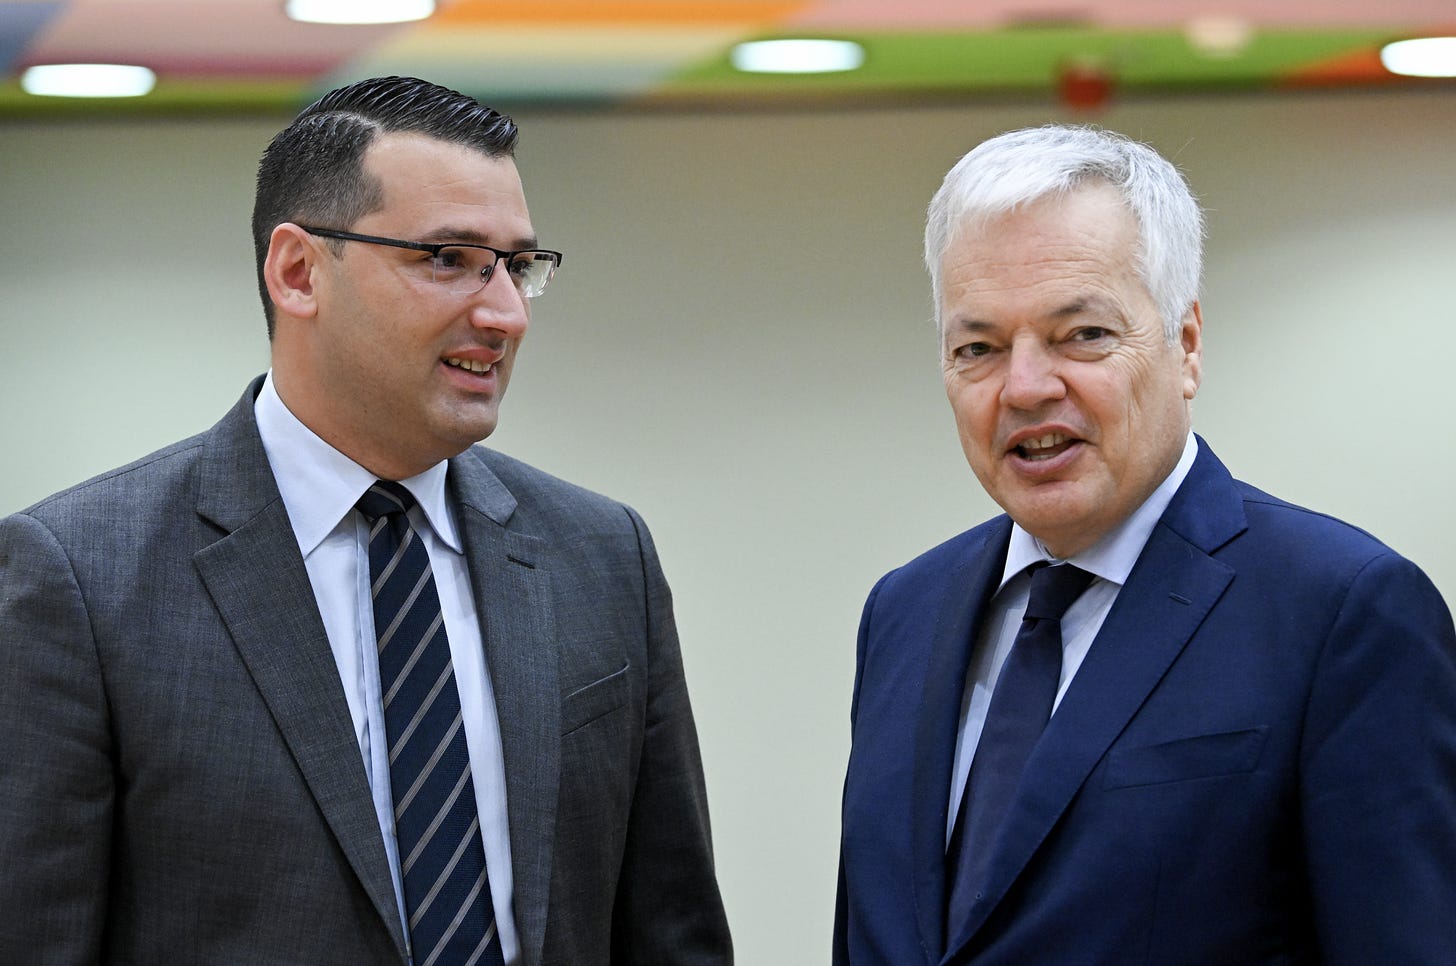 Justice minister Jonathan Attard (left) with European Justice Commissioner Dider Reynders